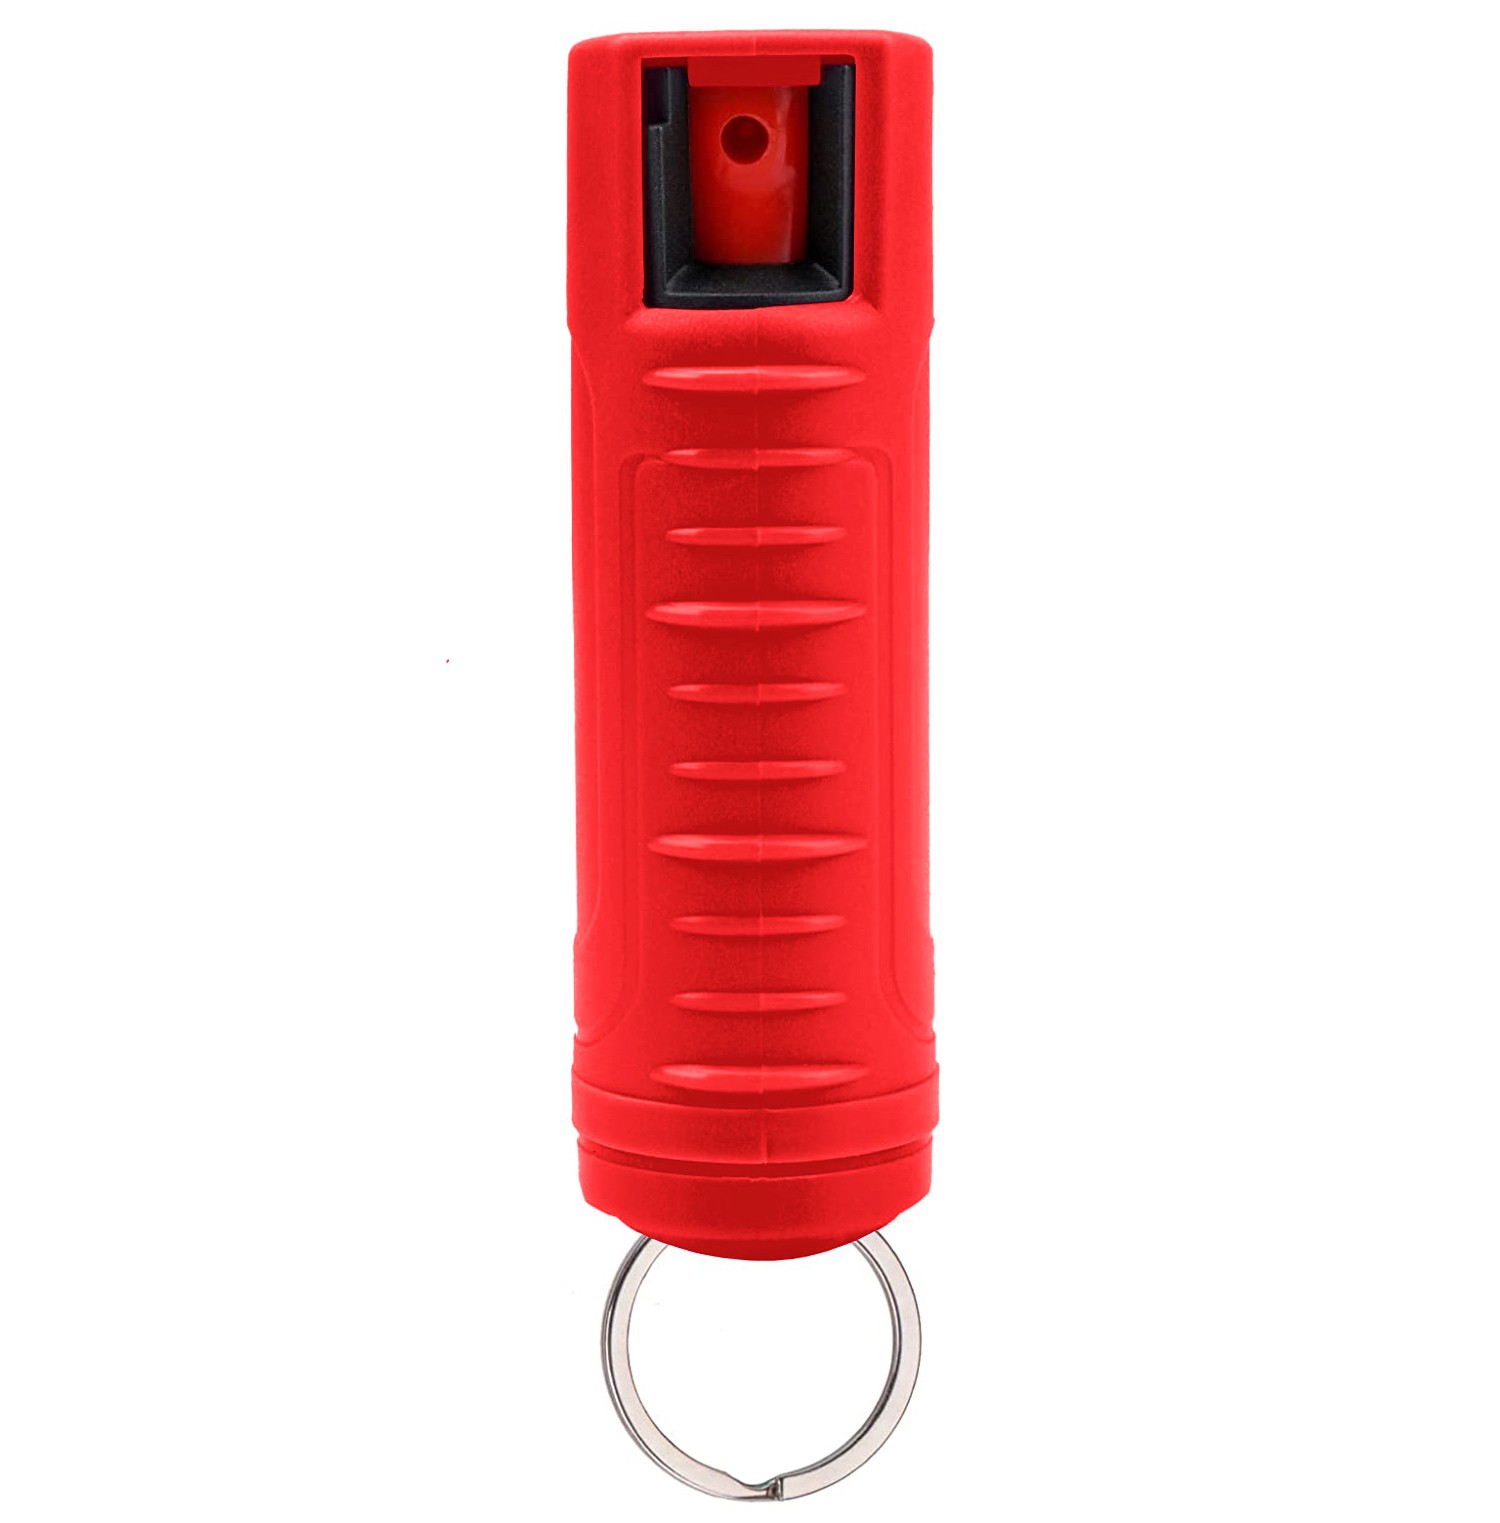 Red Pepper Spray for Women Carry Self-Defense Small Canister Big  Protection30ml